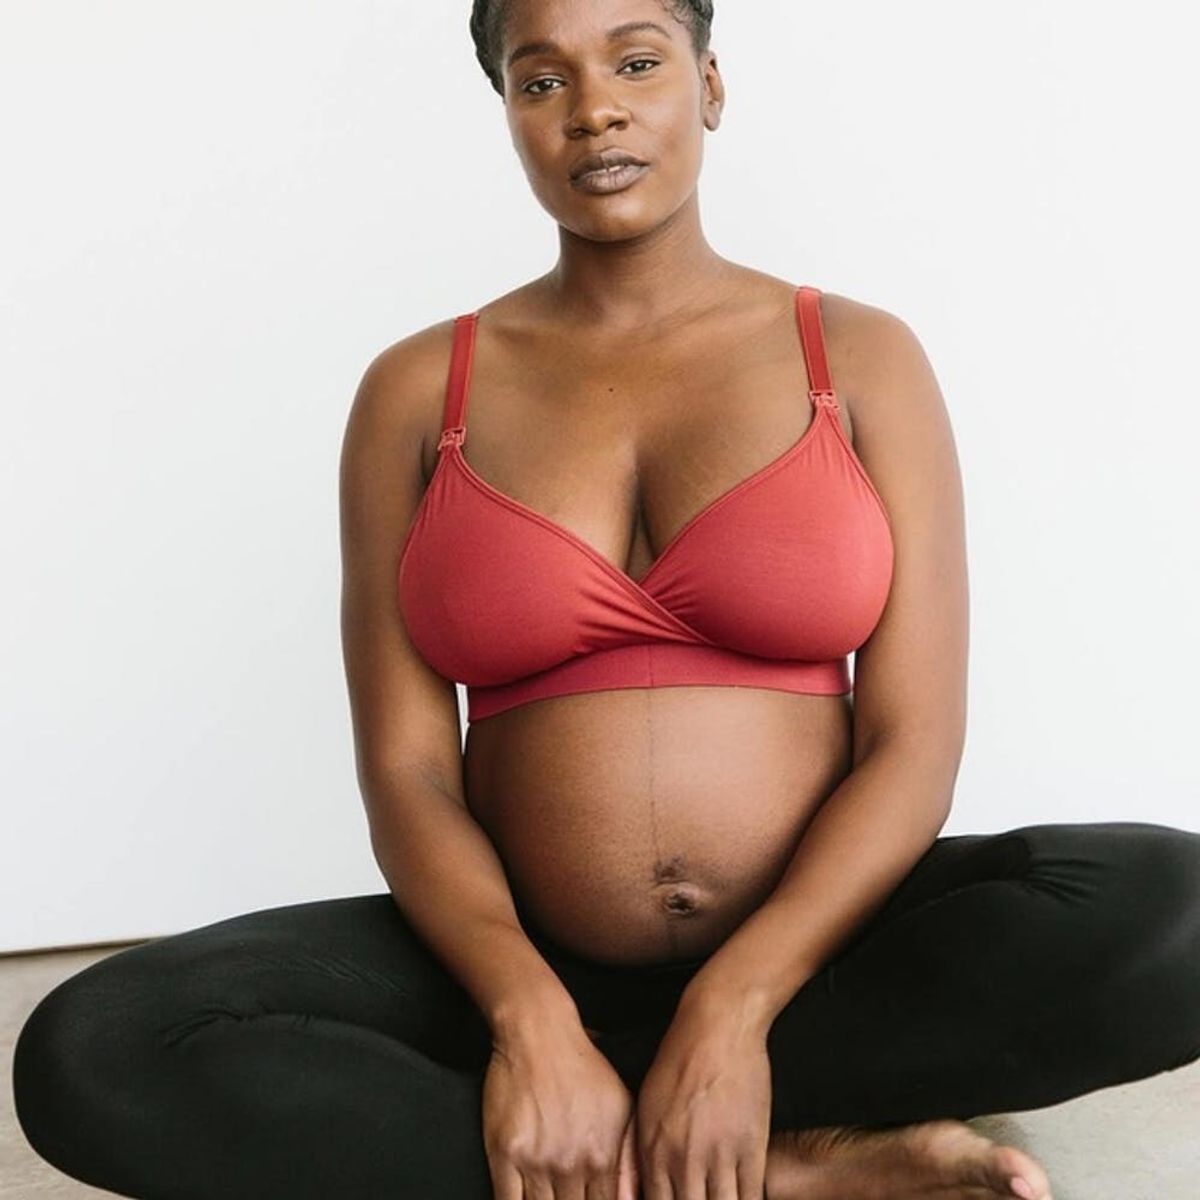 The 8 Best Nursing Bras According to Real Moms